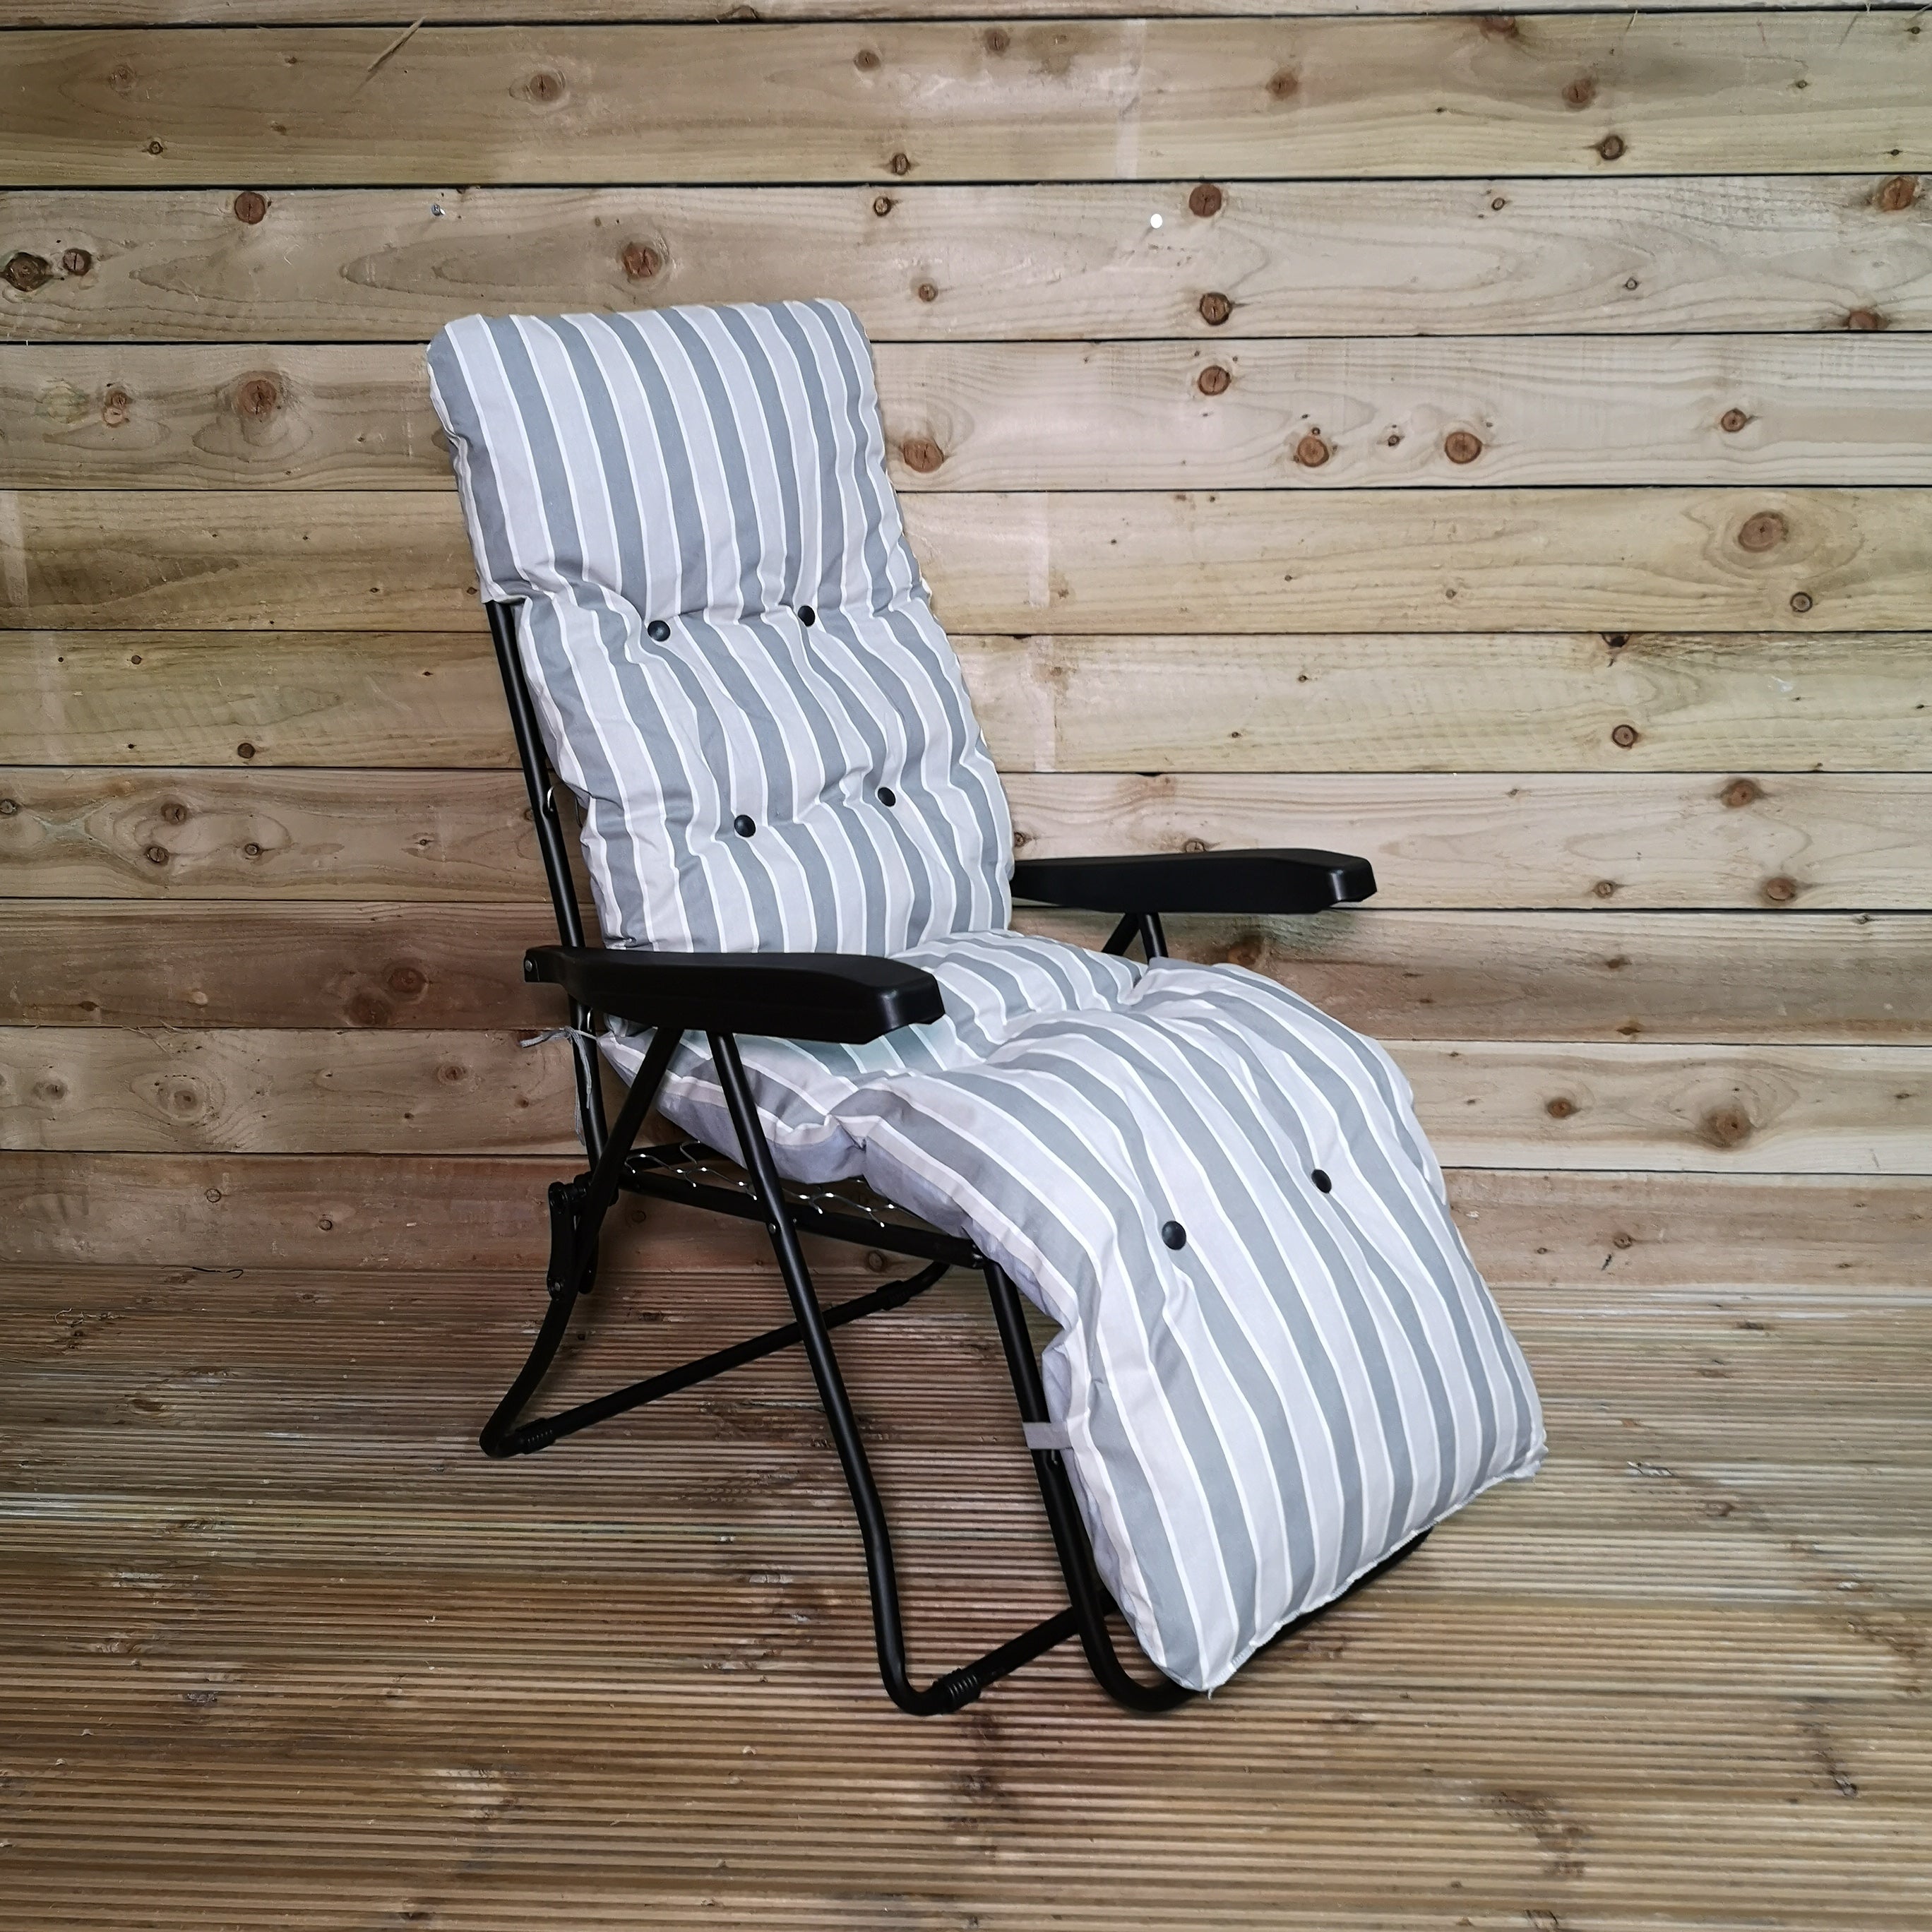 Comfortable and cheap high quality sun lounger, perfect for relaxing in the garden